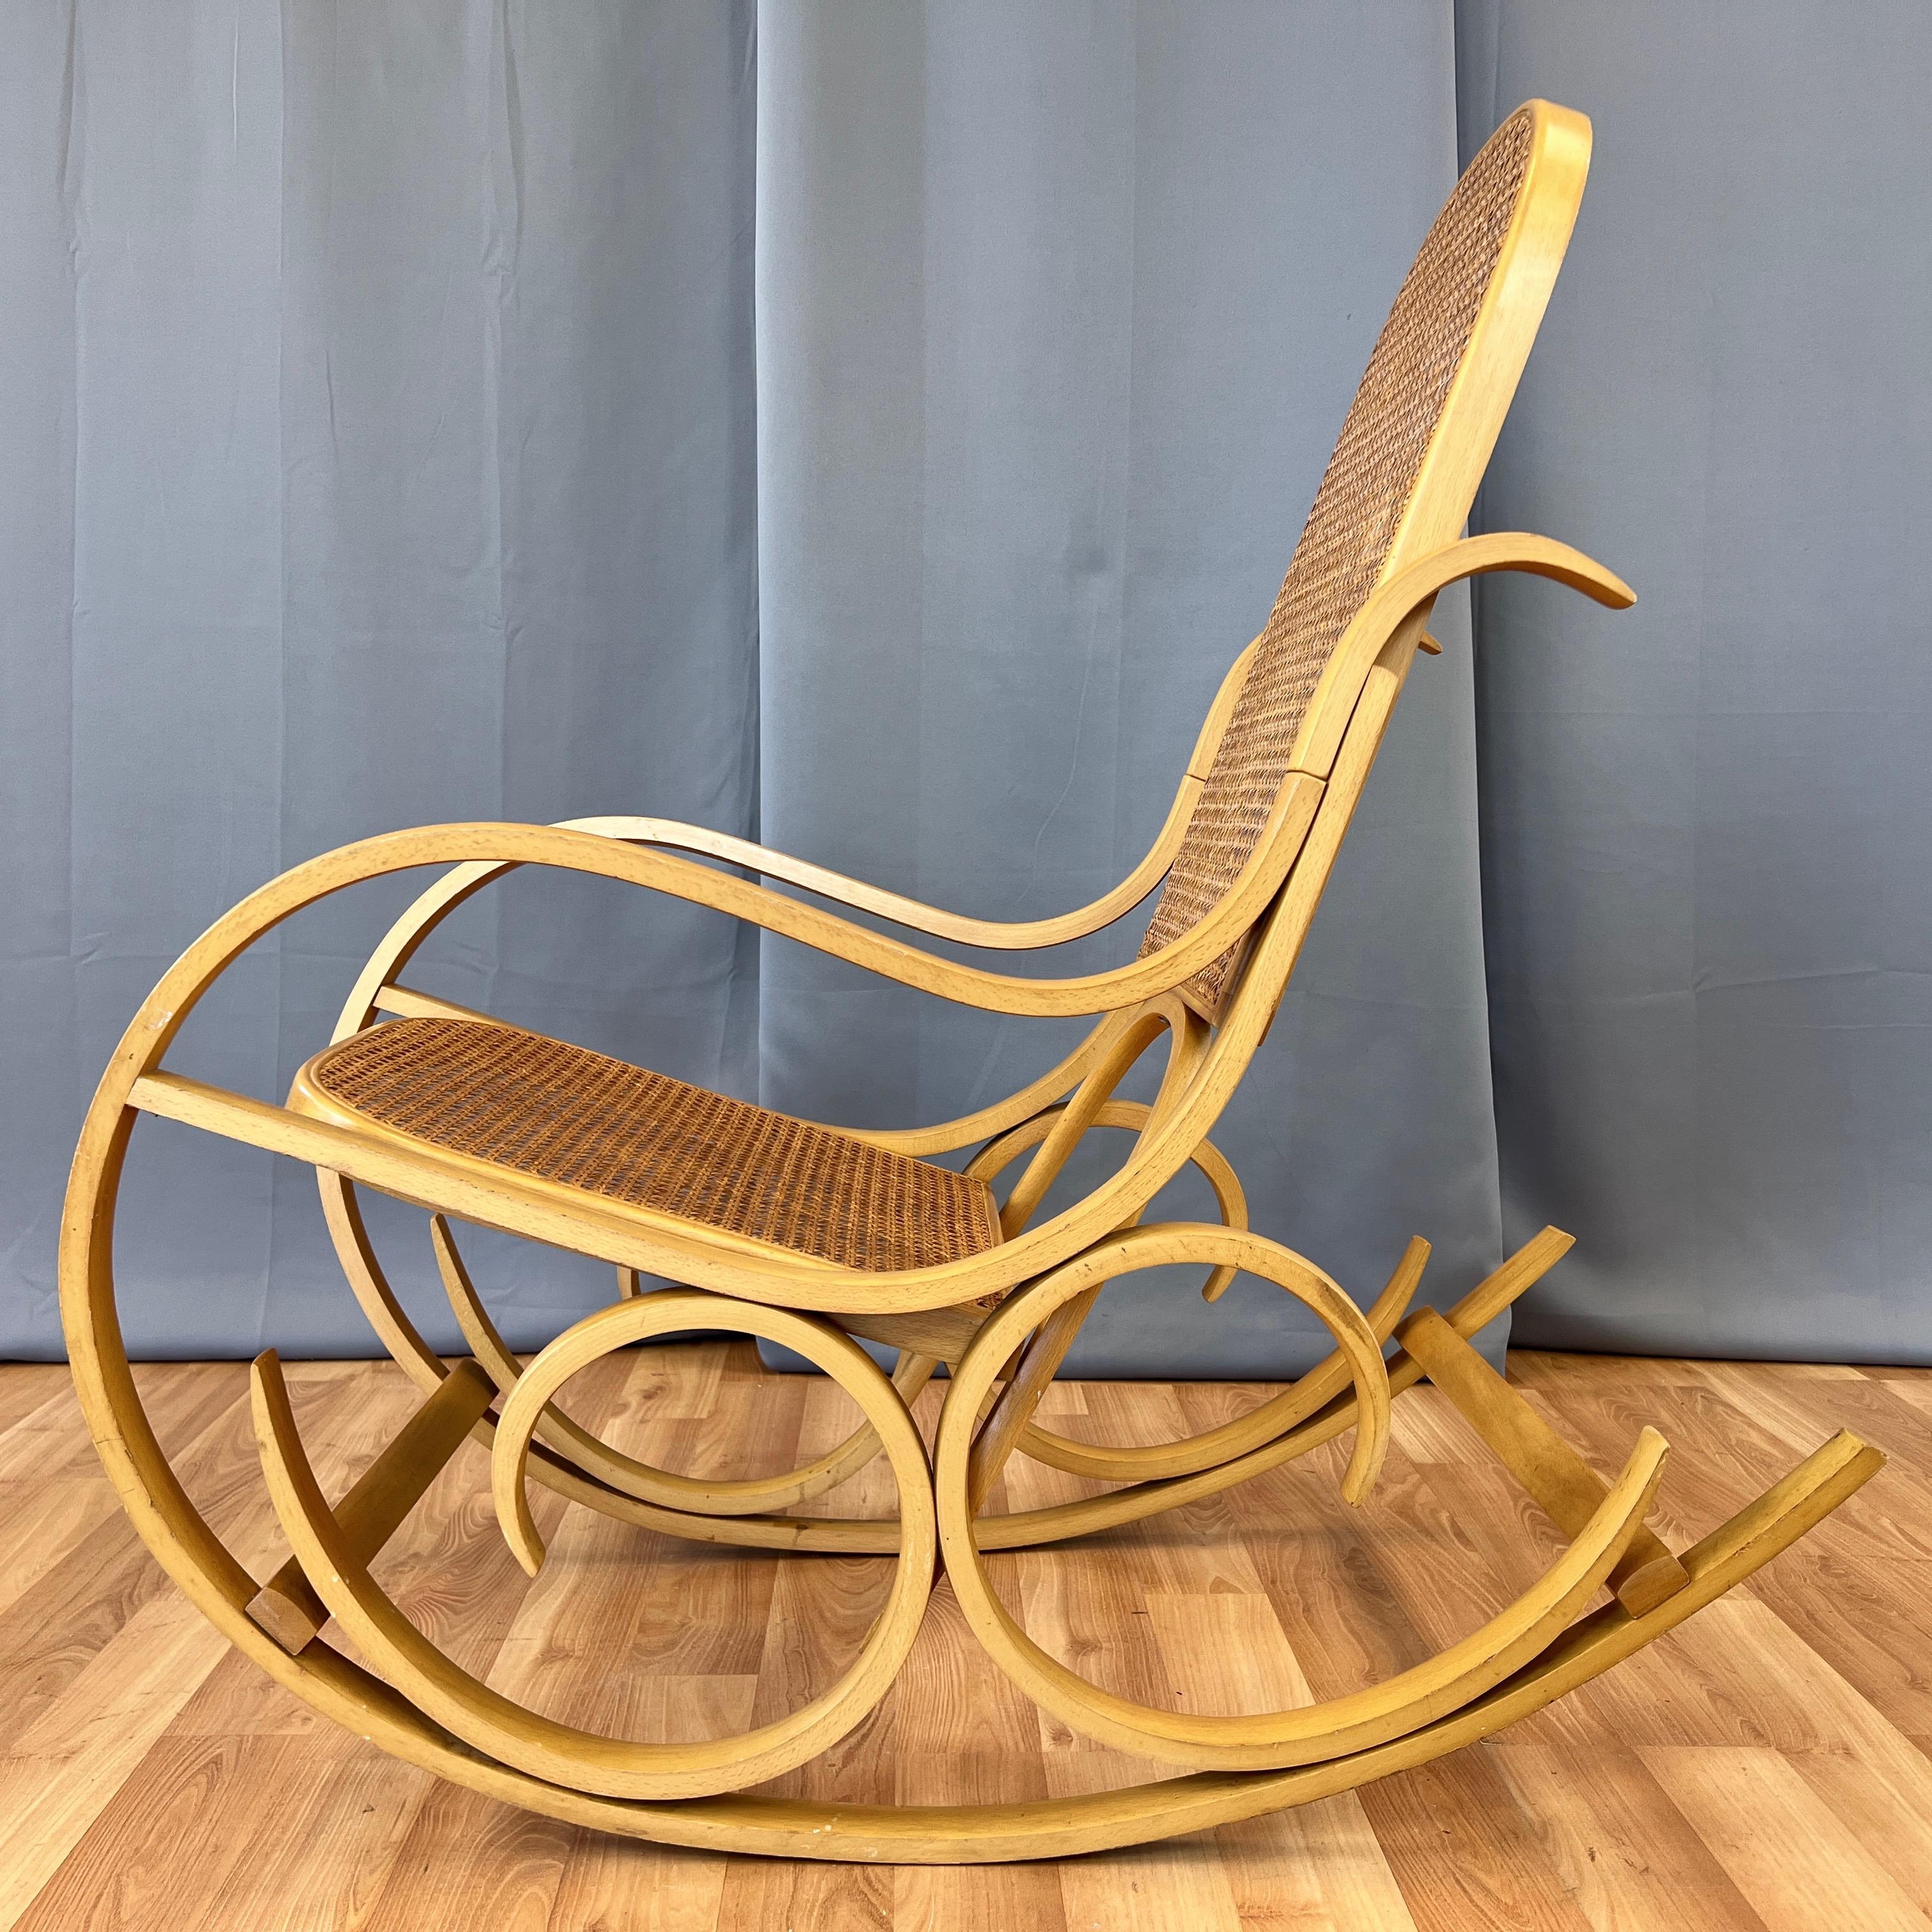 Bohemian Luigi Crassevig Italian Bentwood Rocking Chair with Woven Cane Seat, 1970s For Sale